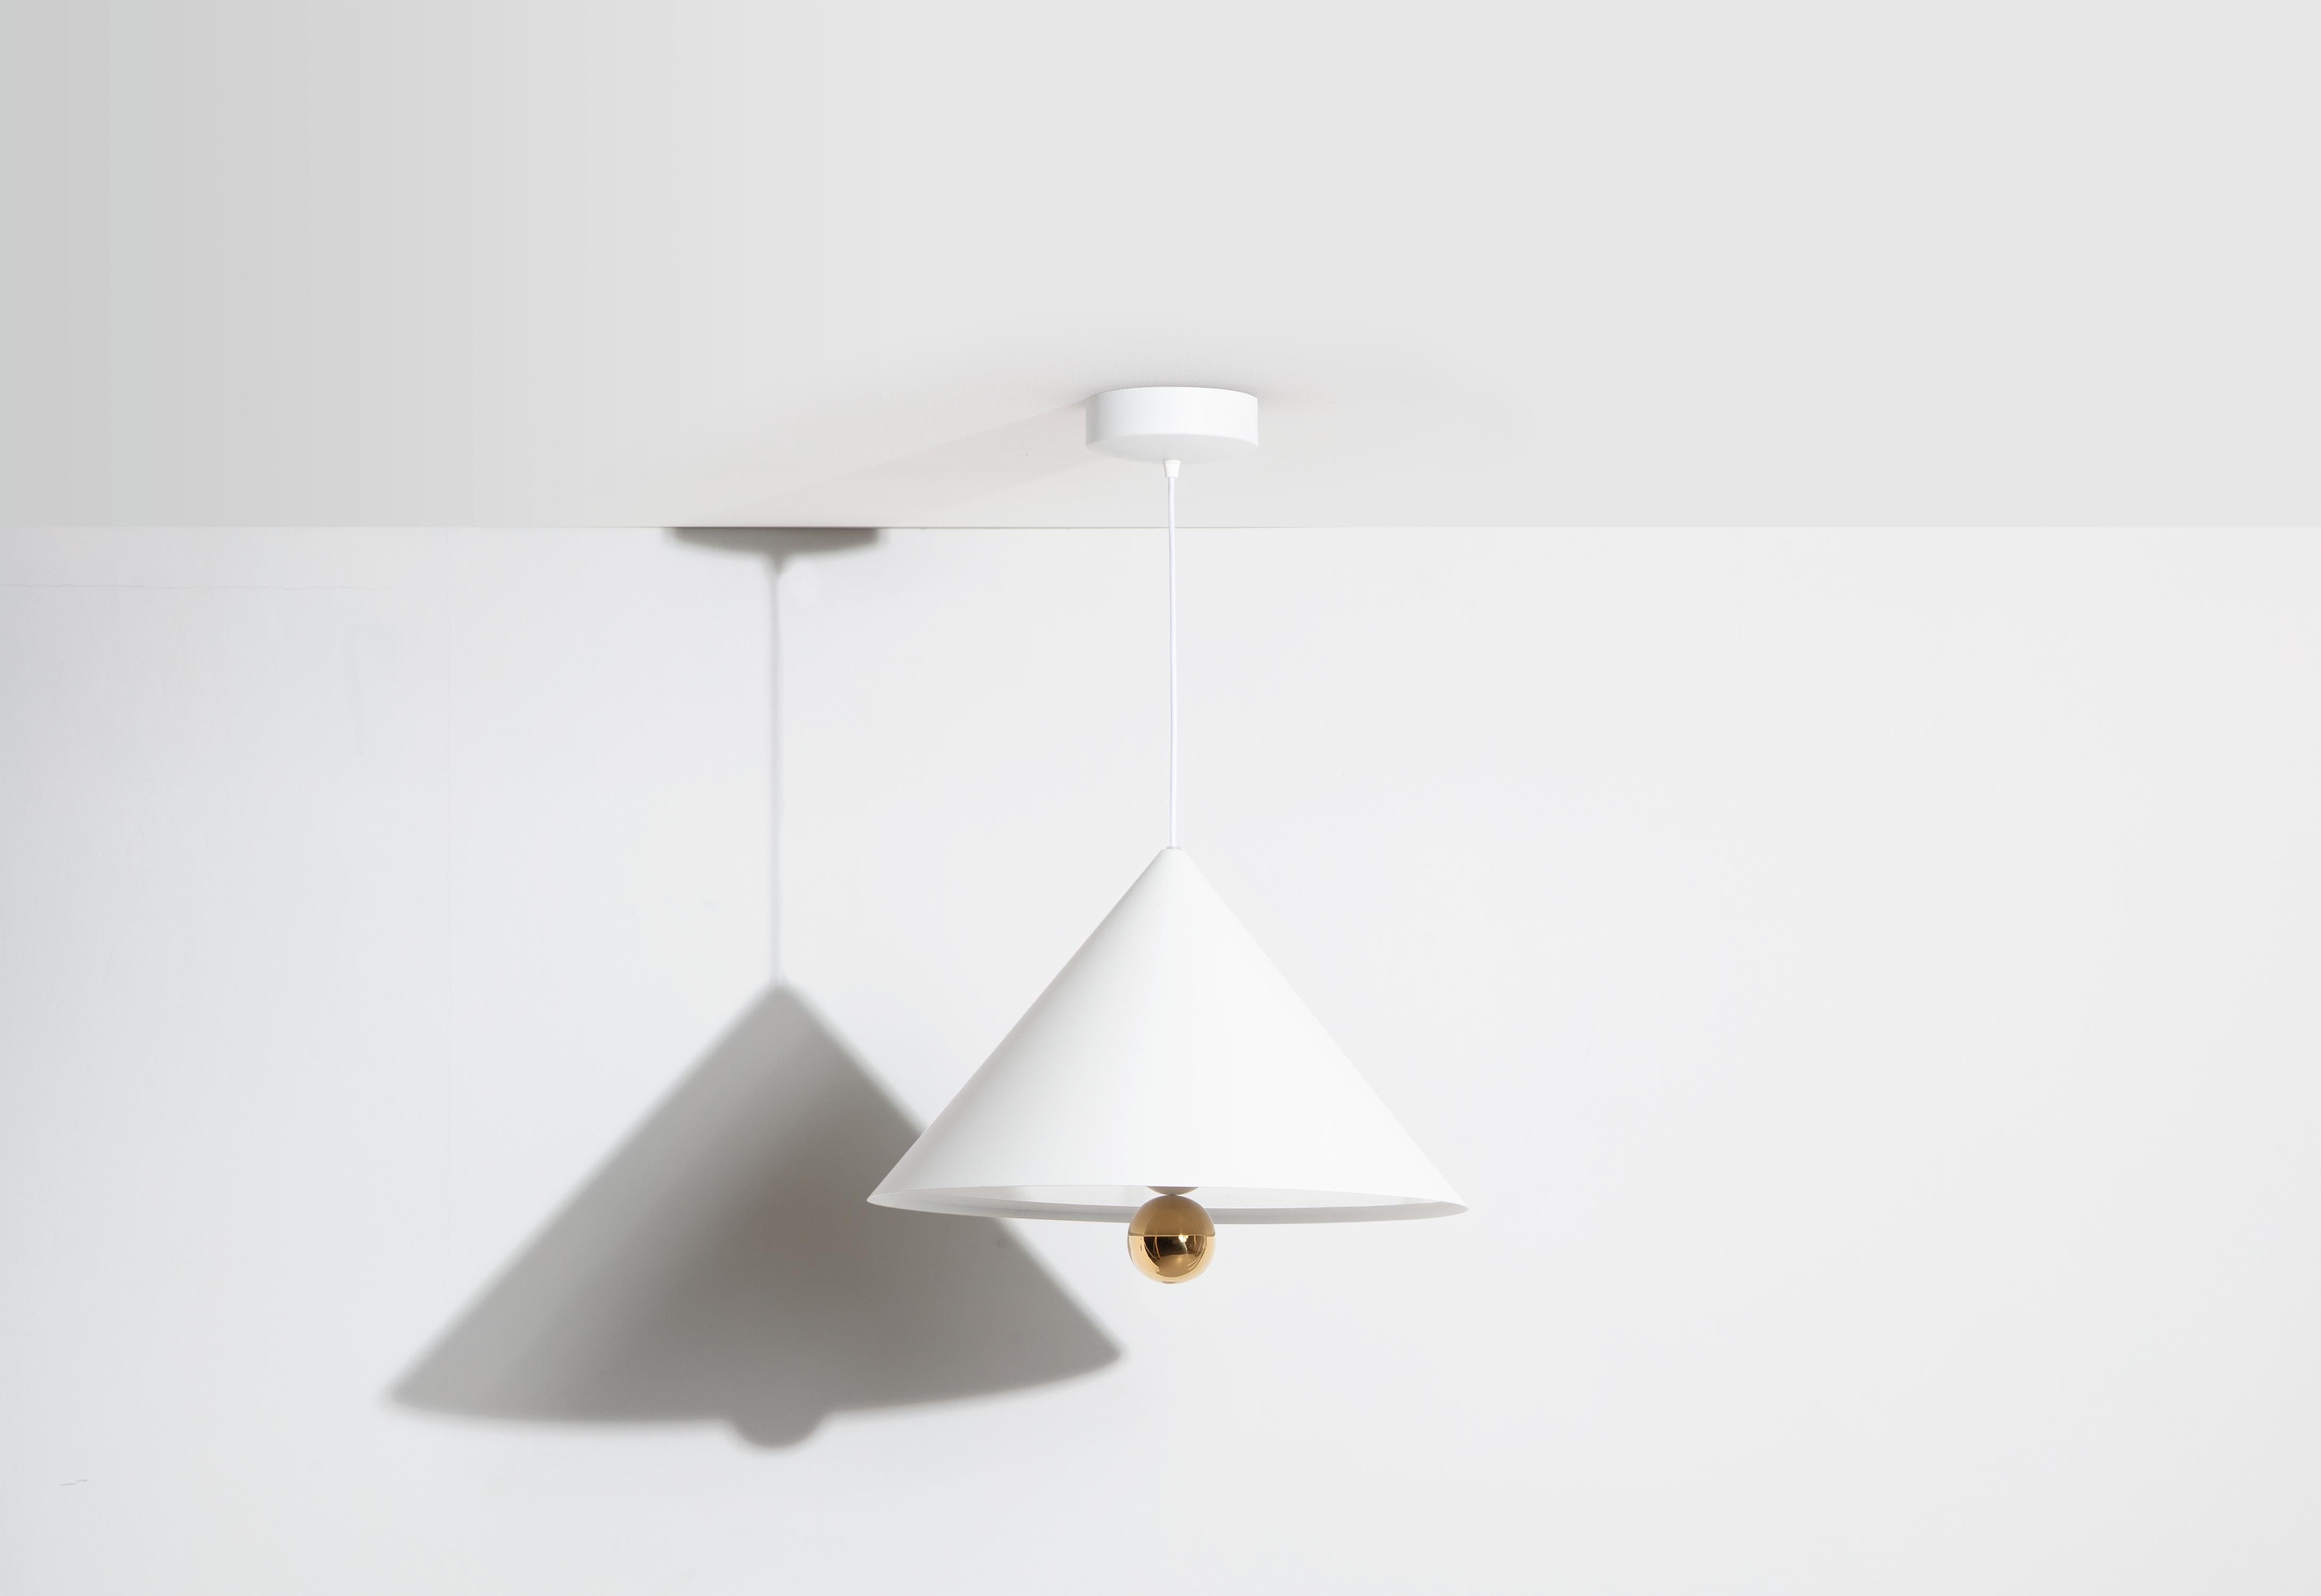 Petite Friture Large Cherry LED Pendant Light in White & Gold Aluminium by Daniel and Emma, 2020

In 2015, the Australian duo designers Daniel and Emma signed Cherry a simple and minimalist pendant lamp design ; an aluminum cone with a bottomed